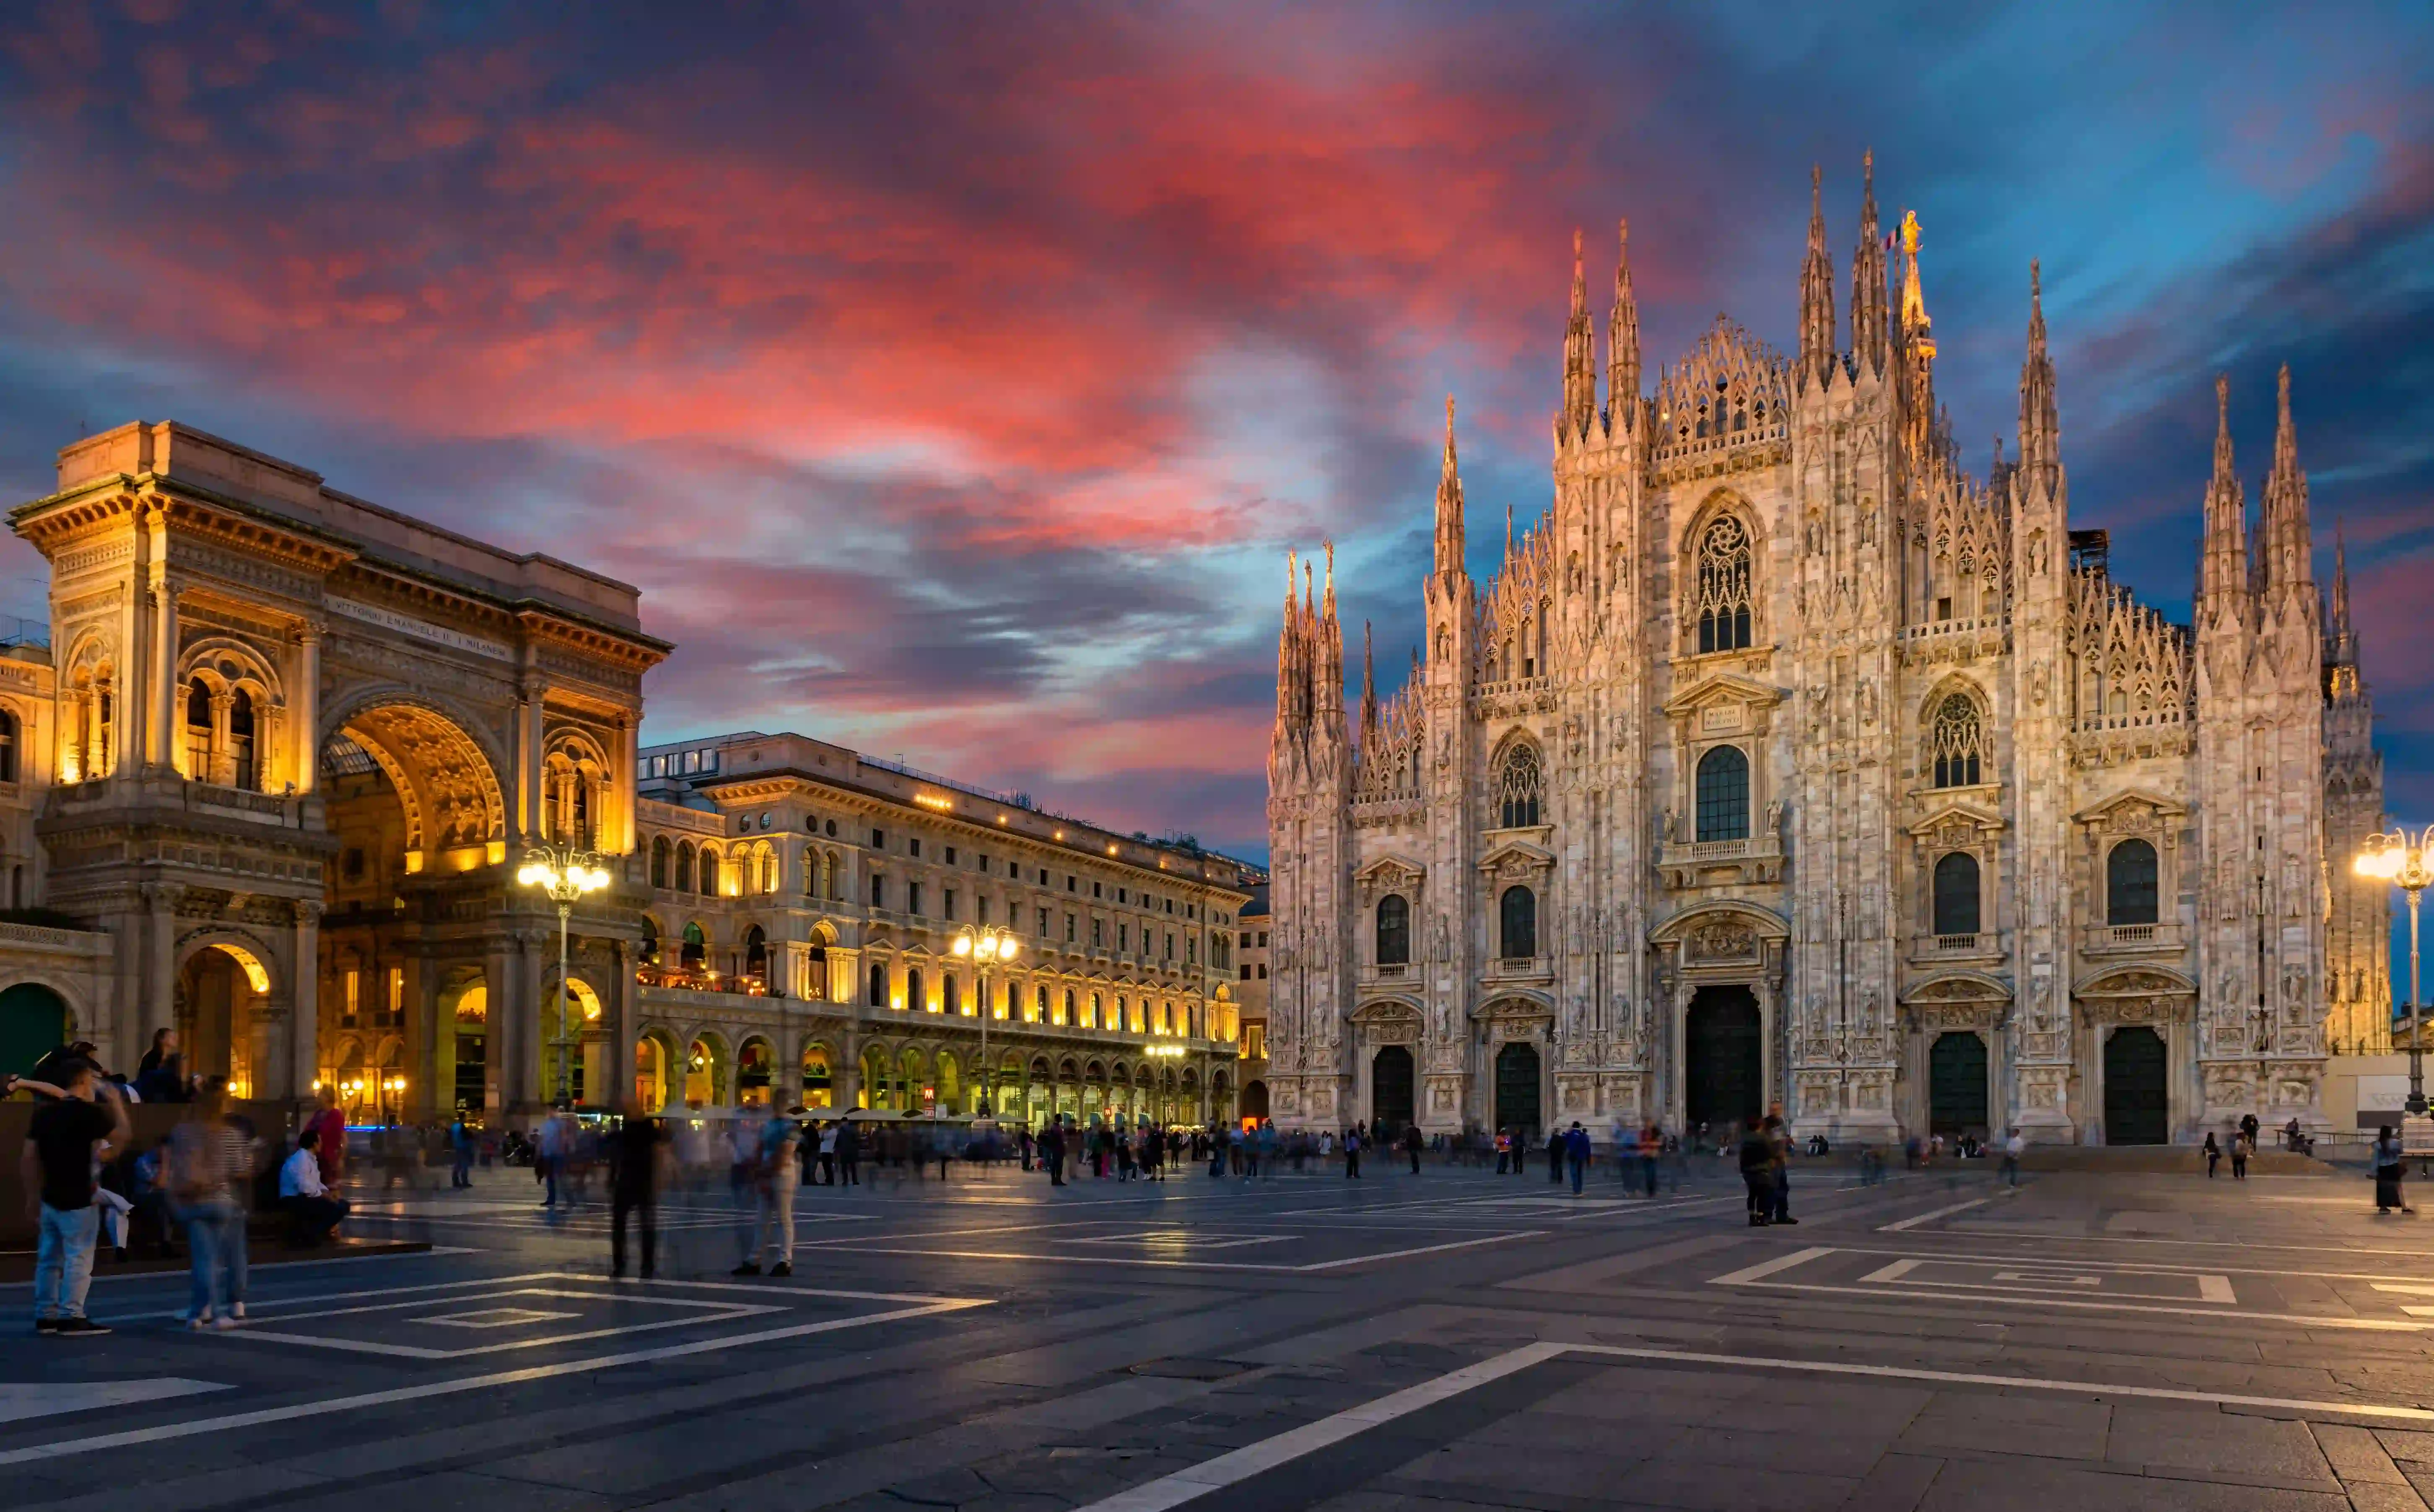 Construction and Civil Engineering Training Courses in Milan